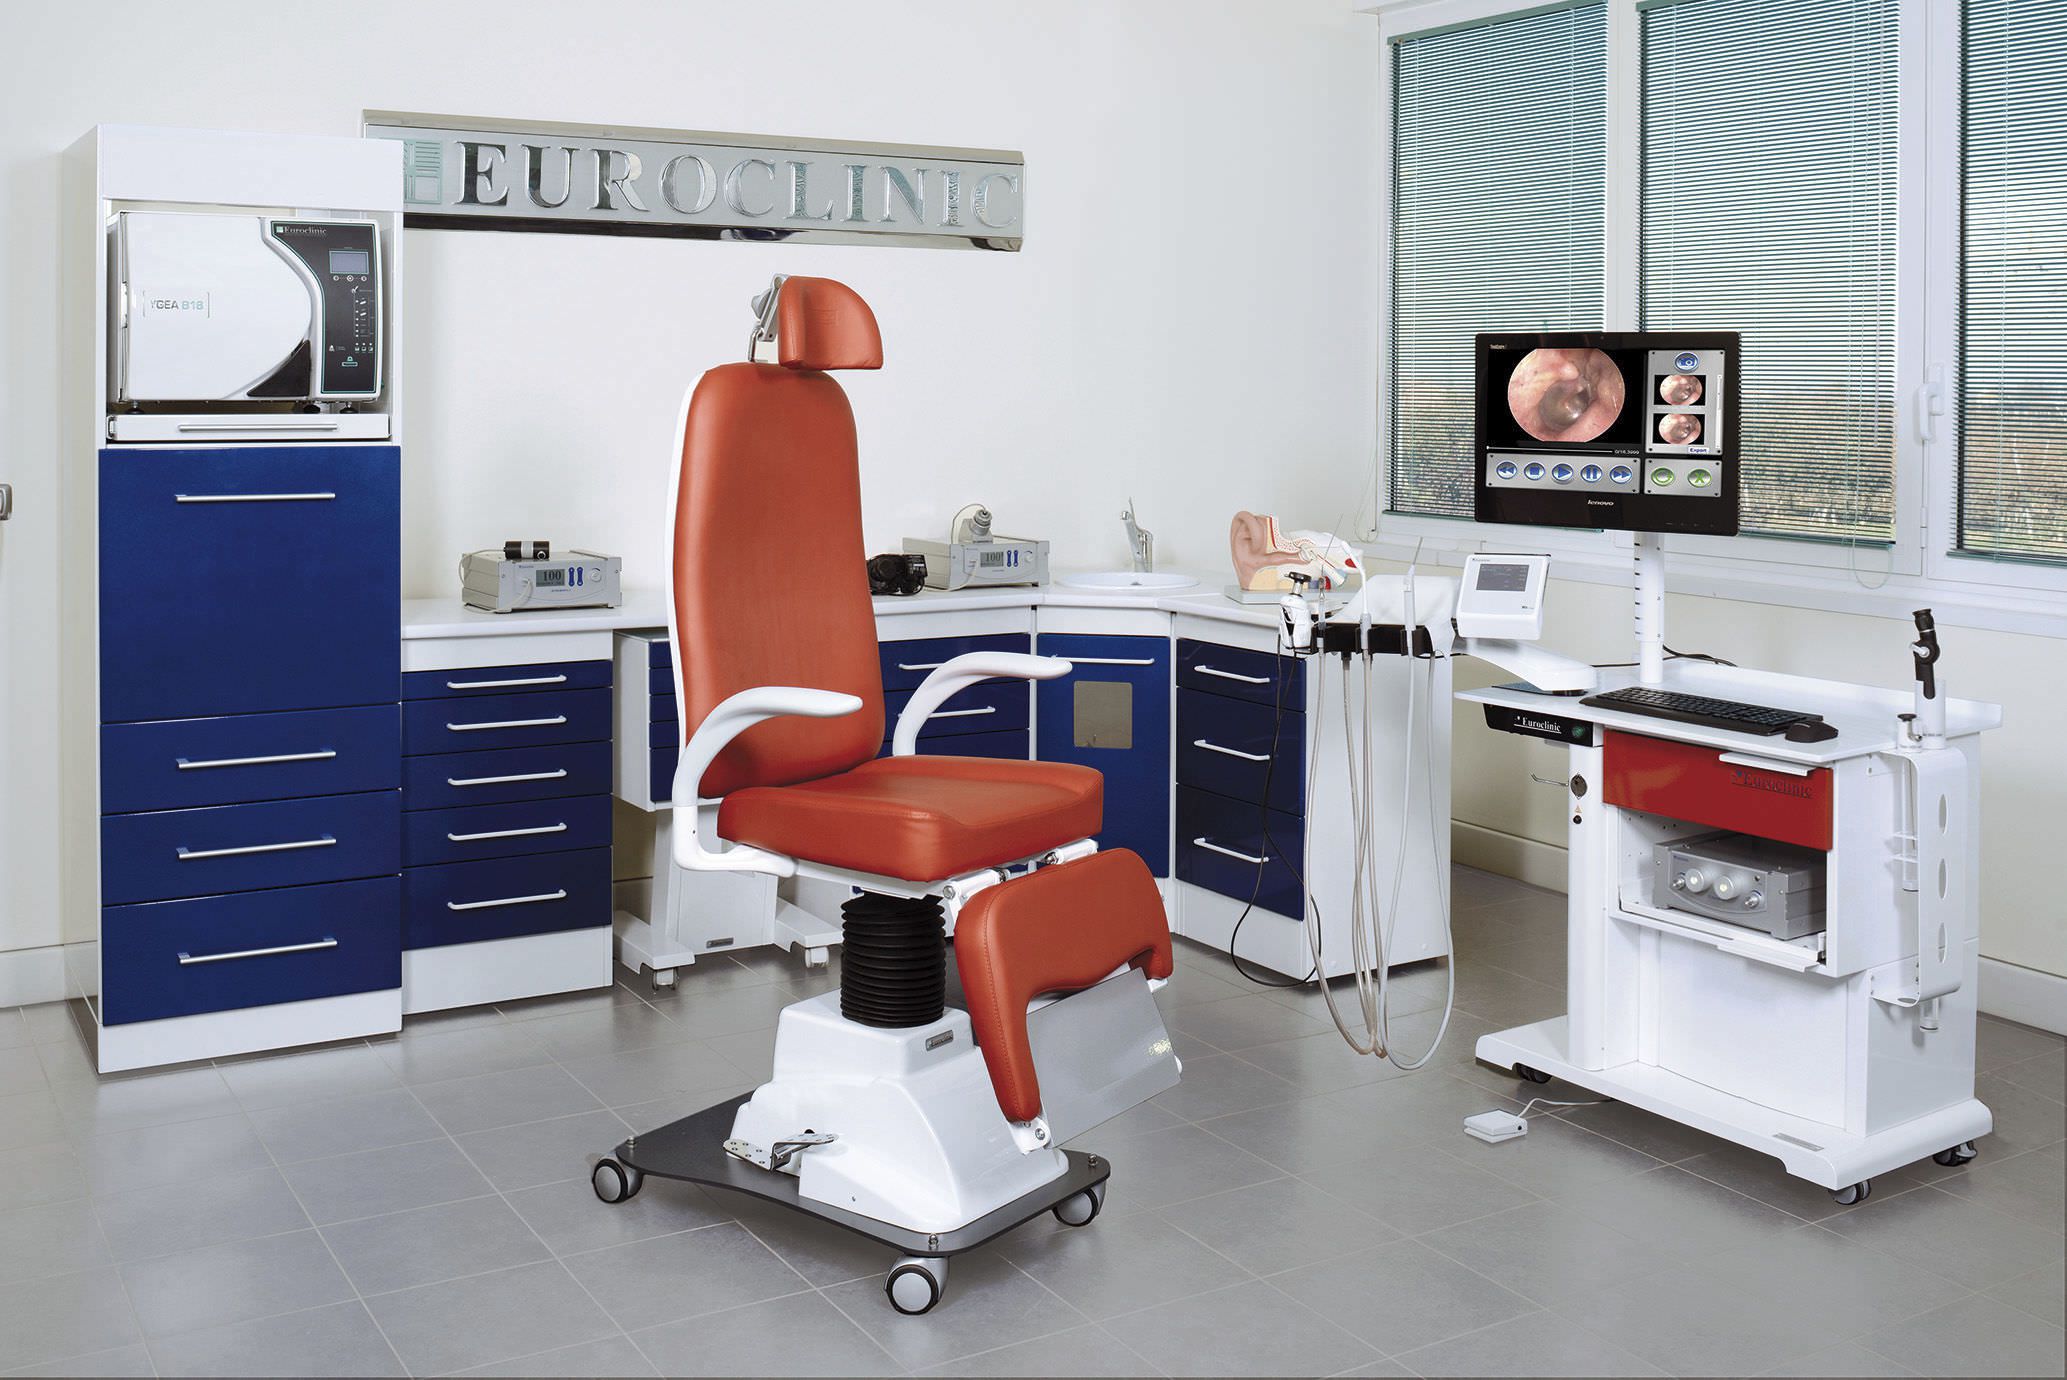 ENT workstation / modular / with chair / 1-station OTOCOMPACT/OTOPV PROFESSIONAL EUROCLINIC